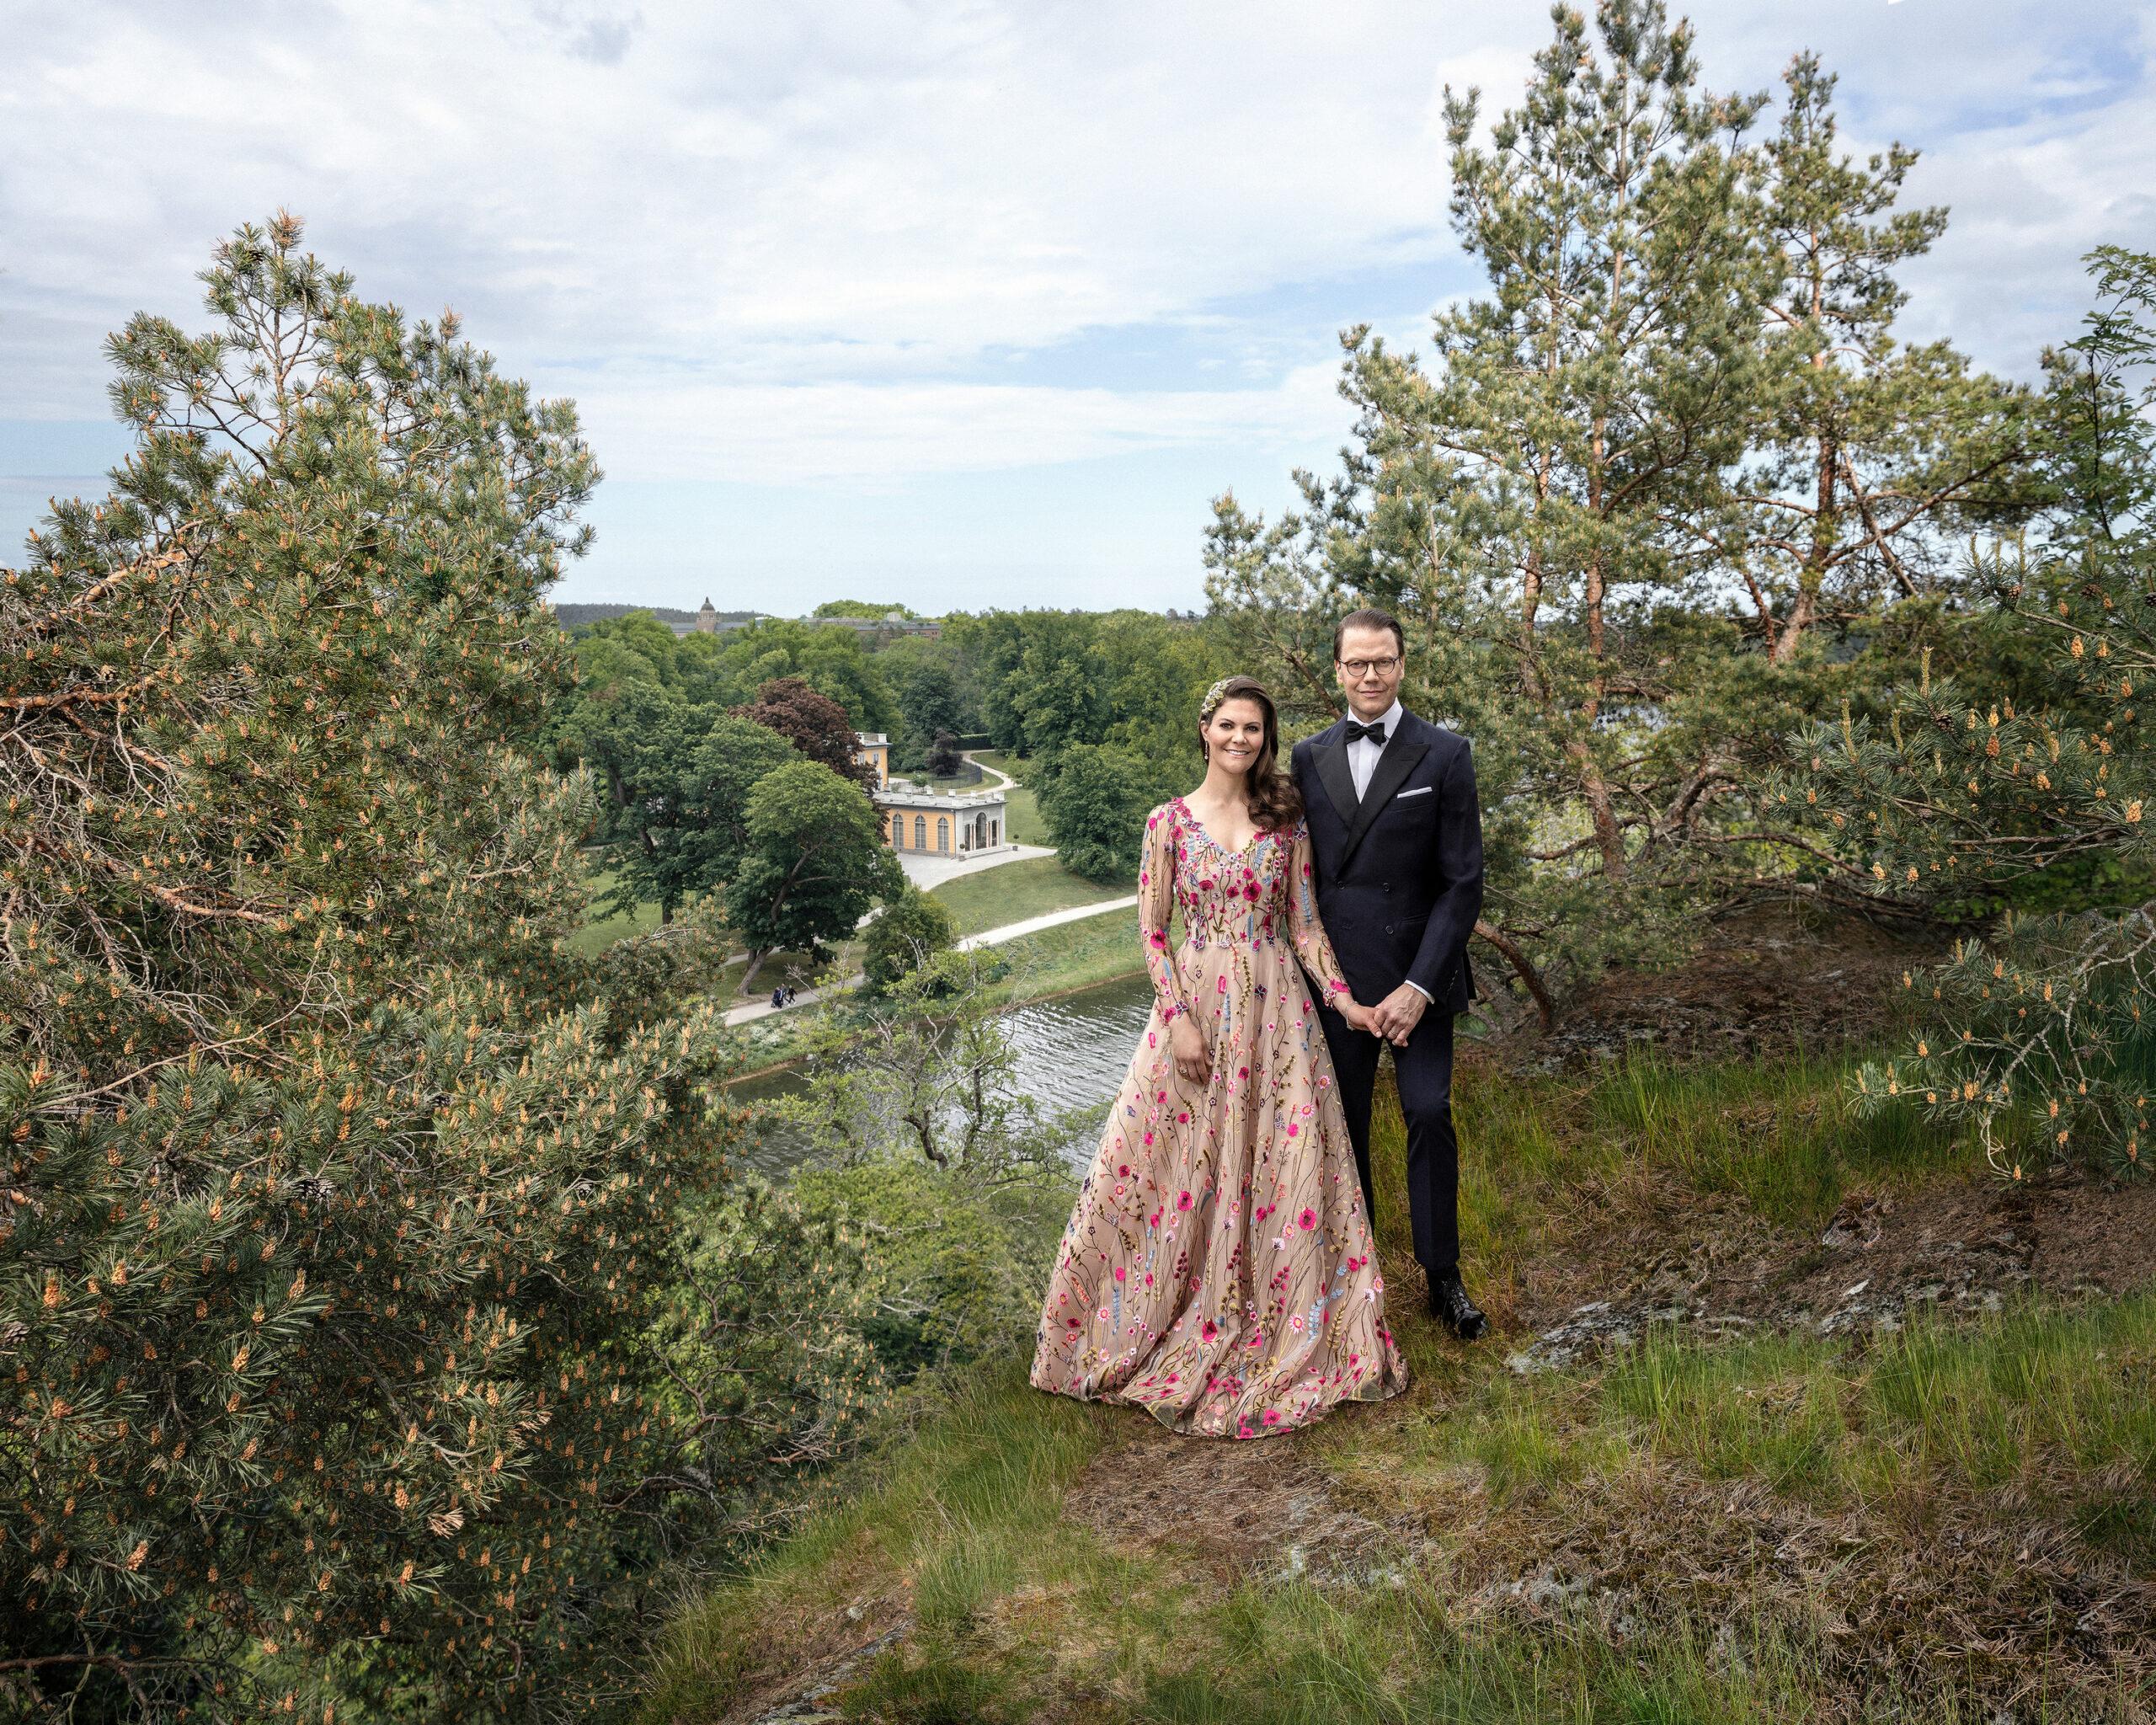 Crown Princess Victoria and Prince Daniel dressed up and standing in a green landscape.